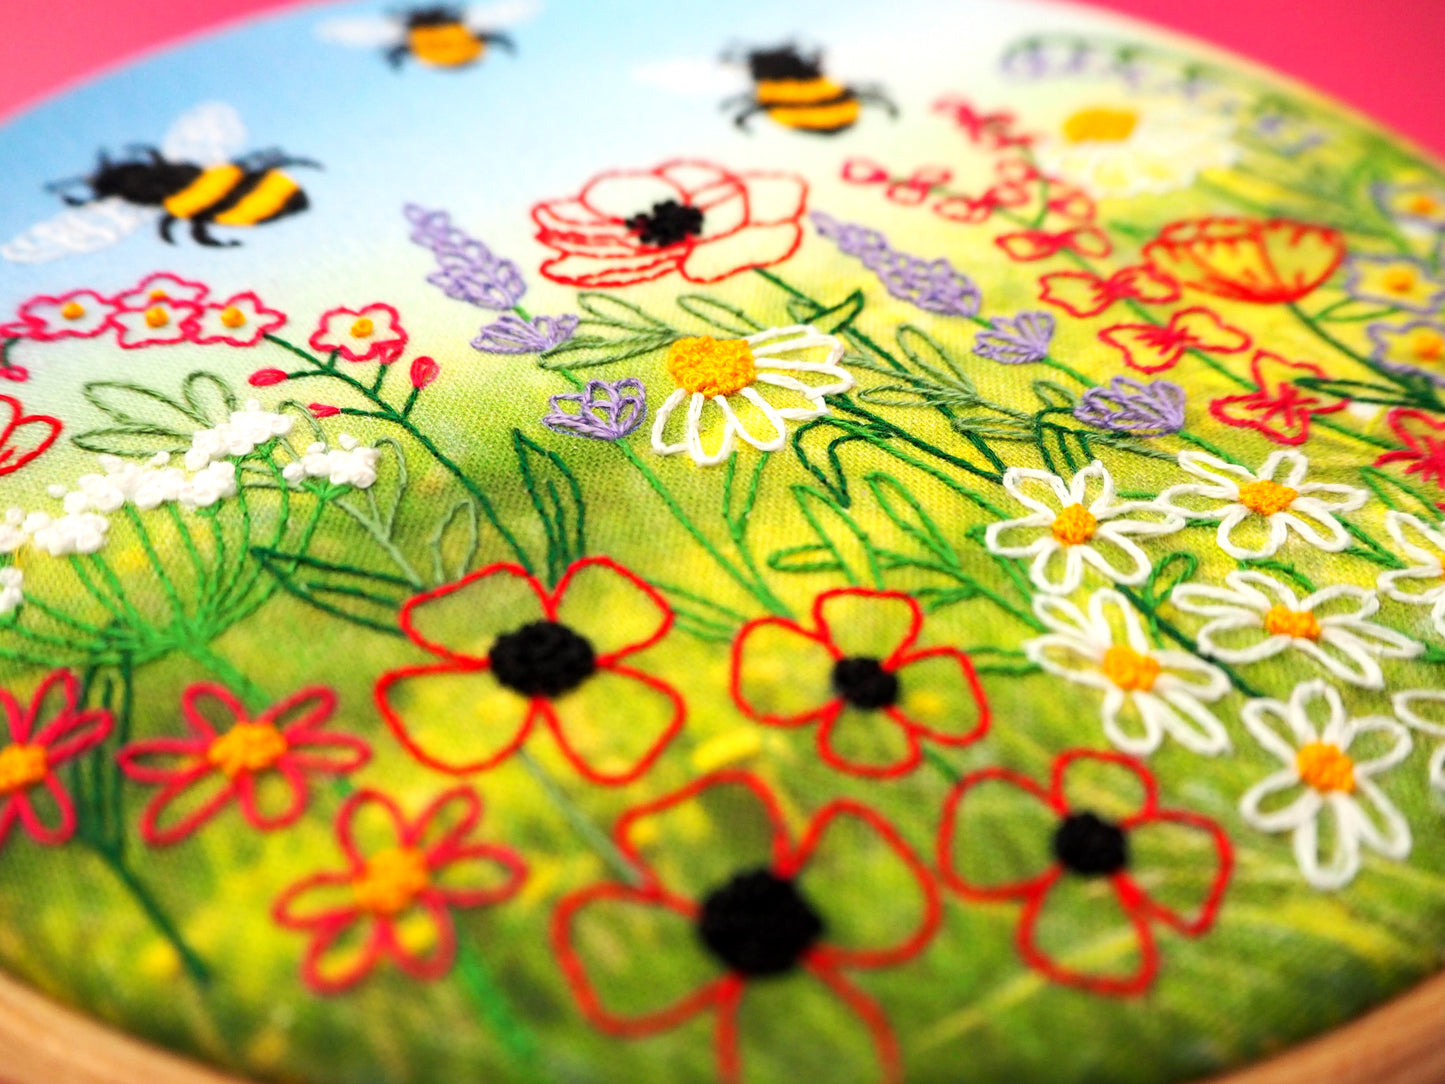 Wildflower and Bees Meadow Embroidery Kit - Embroidery Kits - ohsewbootiful